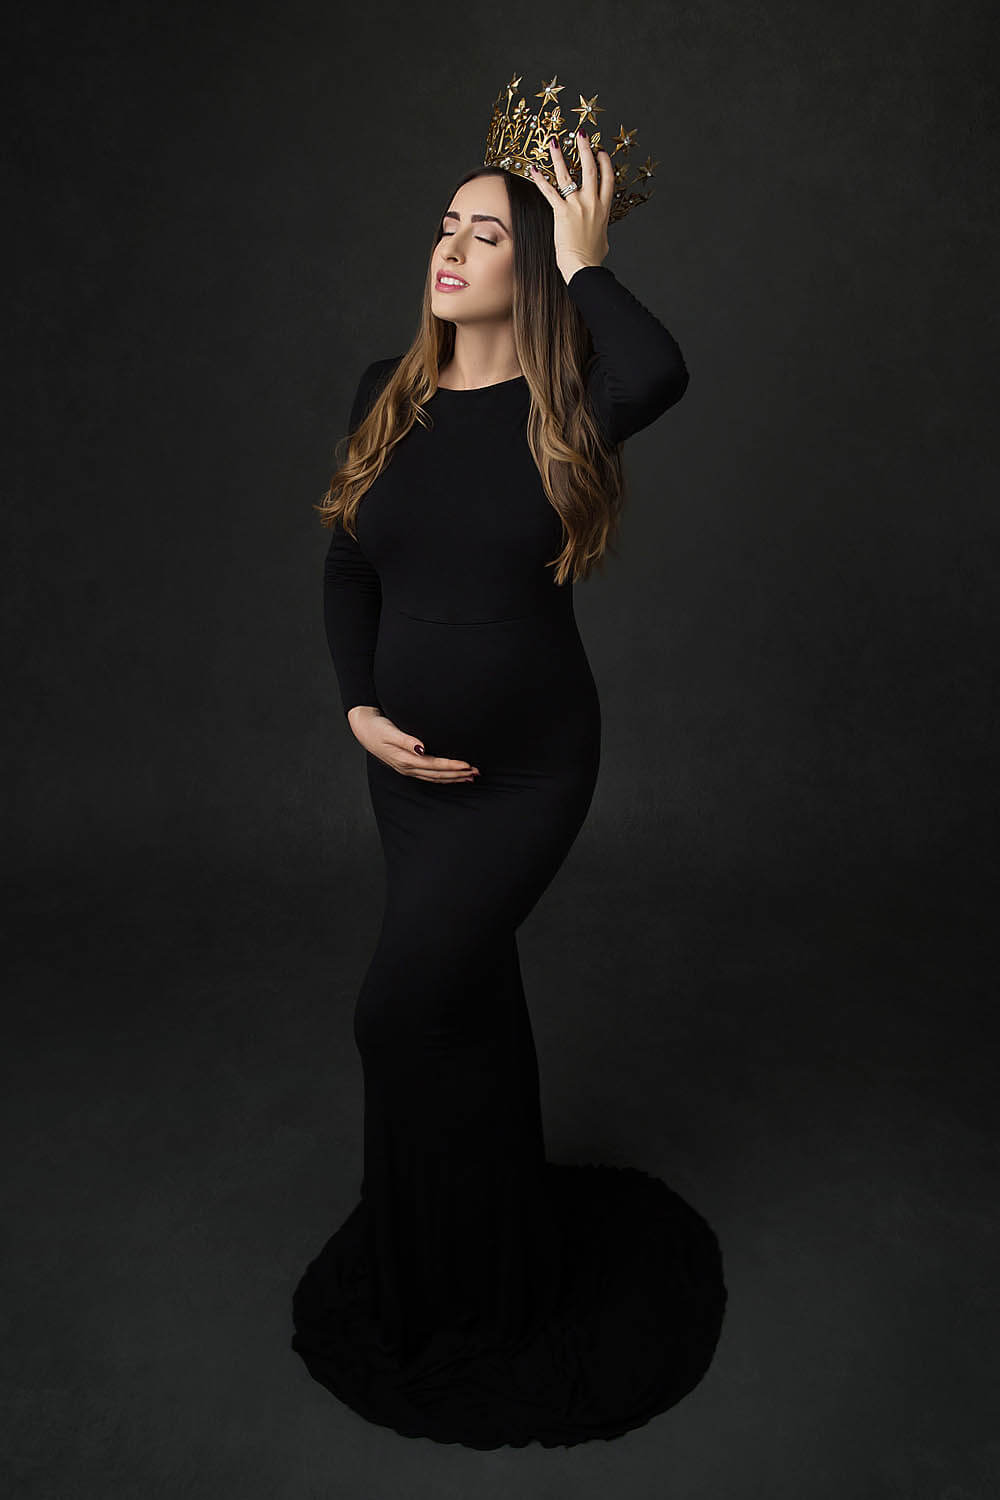 Pregnant woman in black dress with crown in cooper city, FL